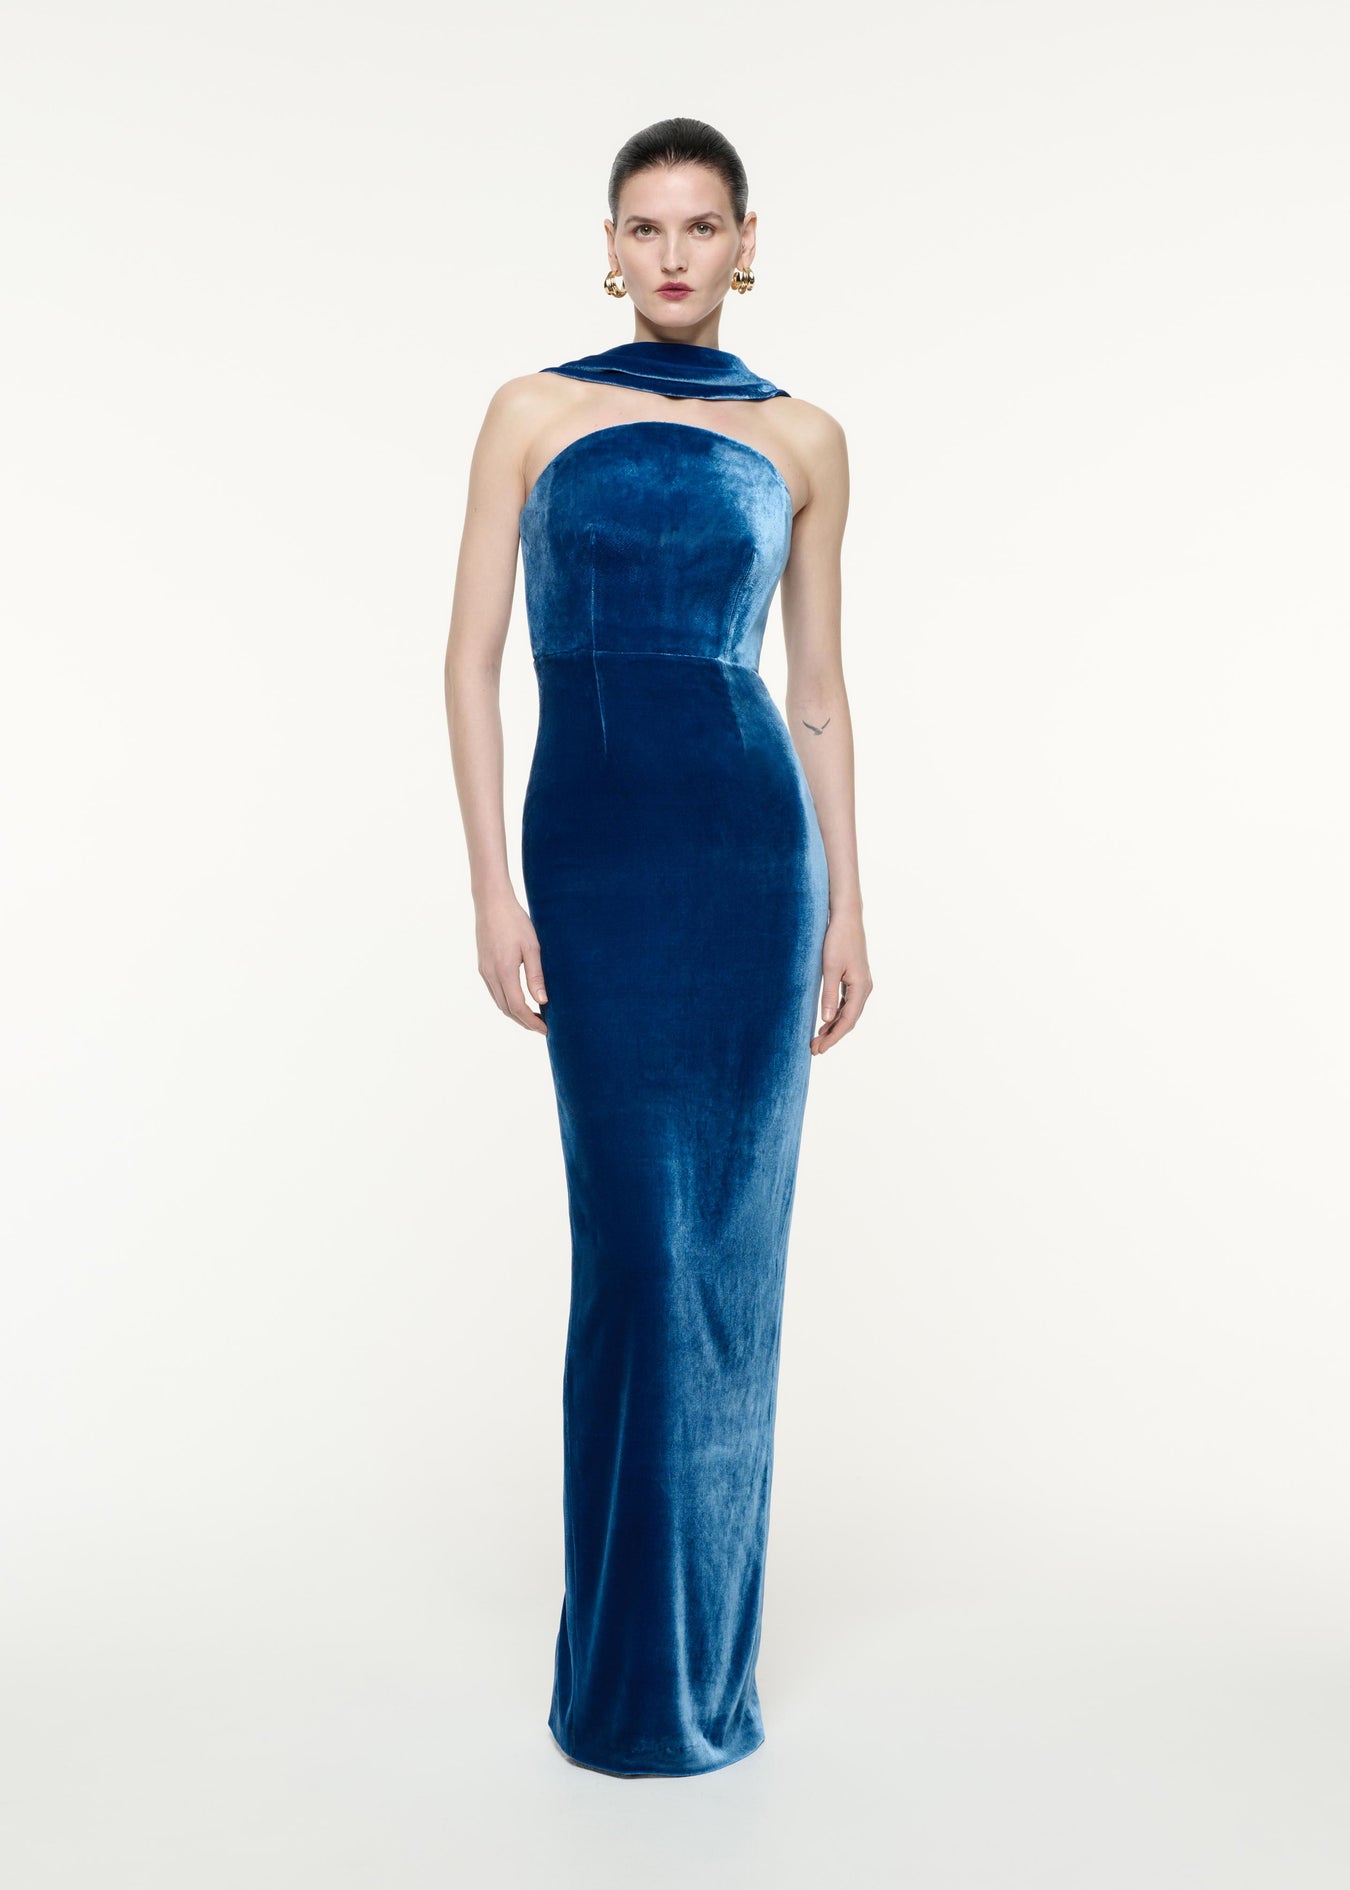 A front view image of a model wearing the Velvet Sash Gown in Navy